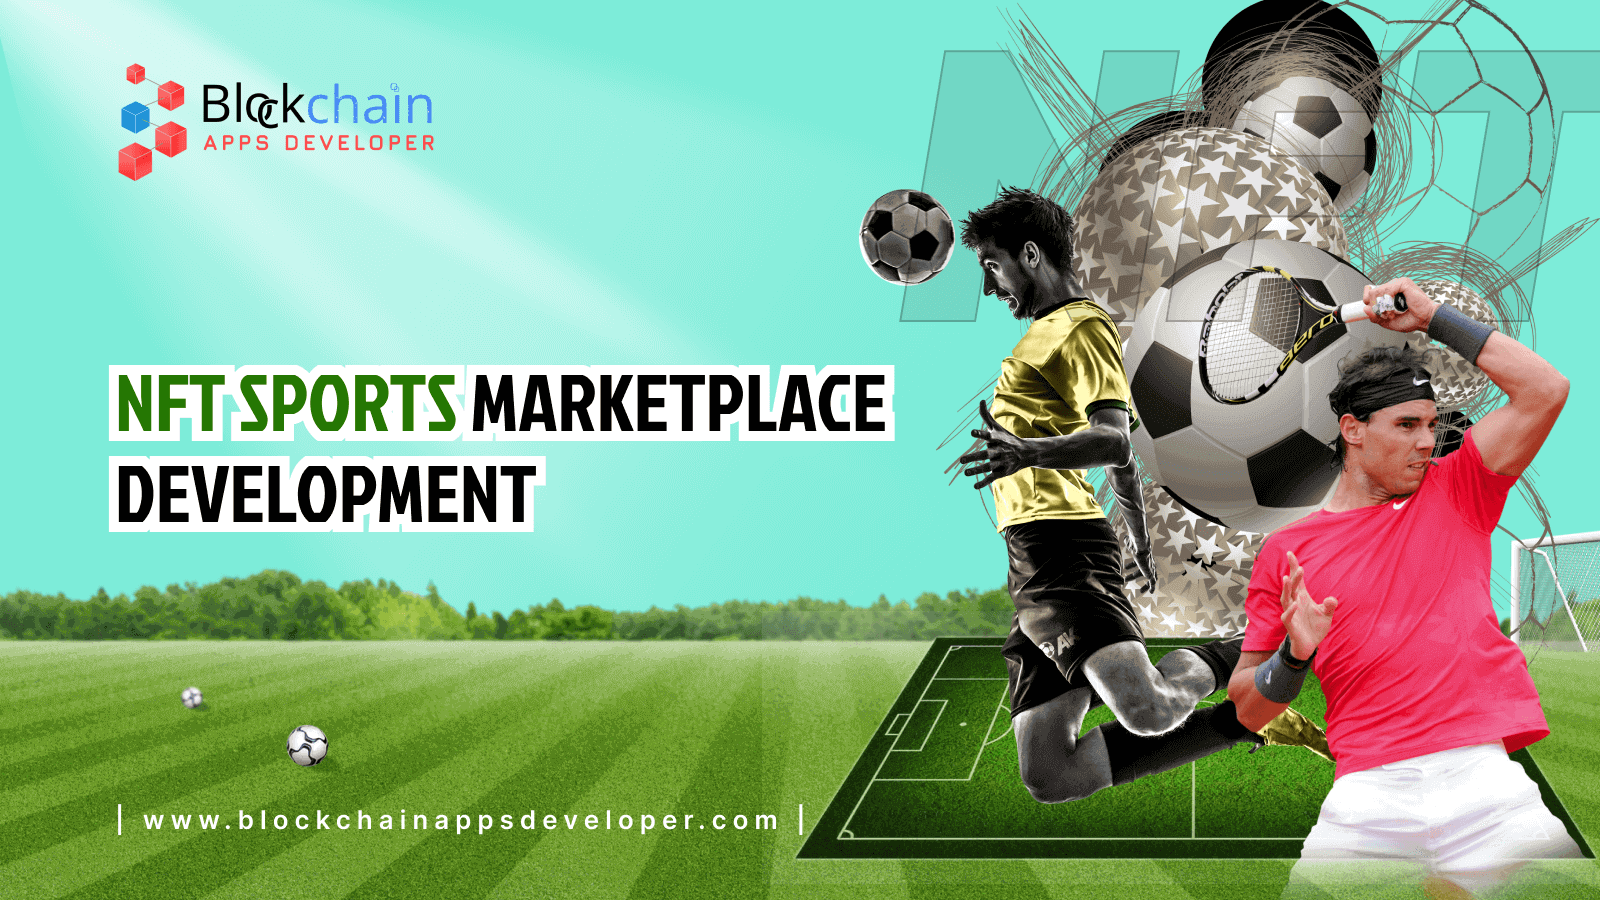 NFT Sports Marketplace Development -To launch an NFT marketplace for sports